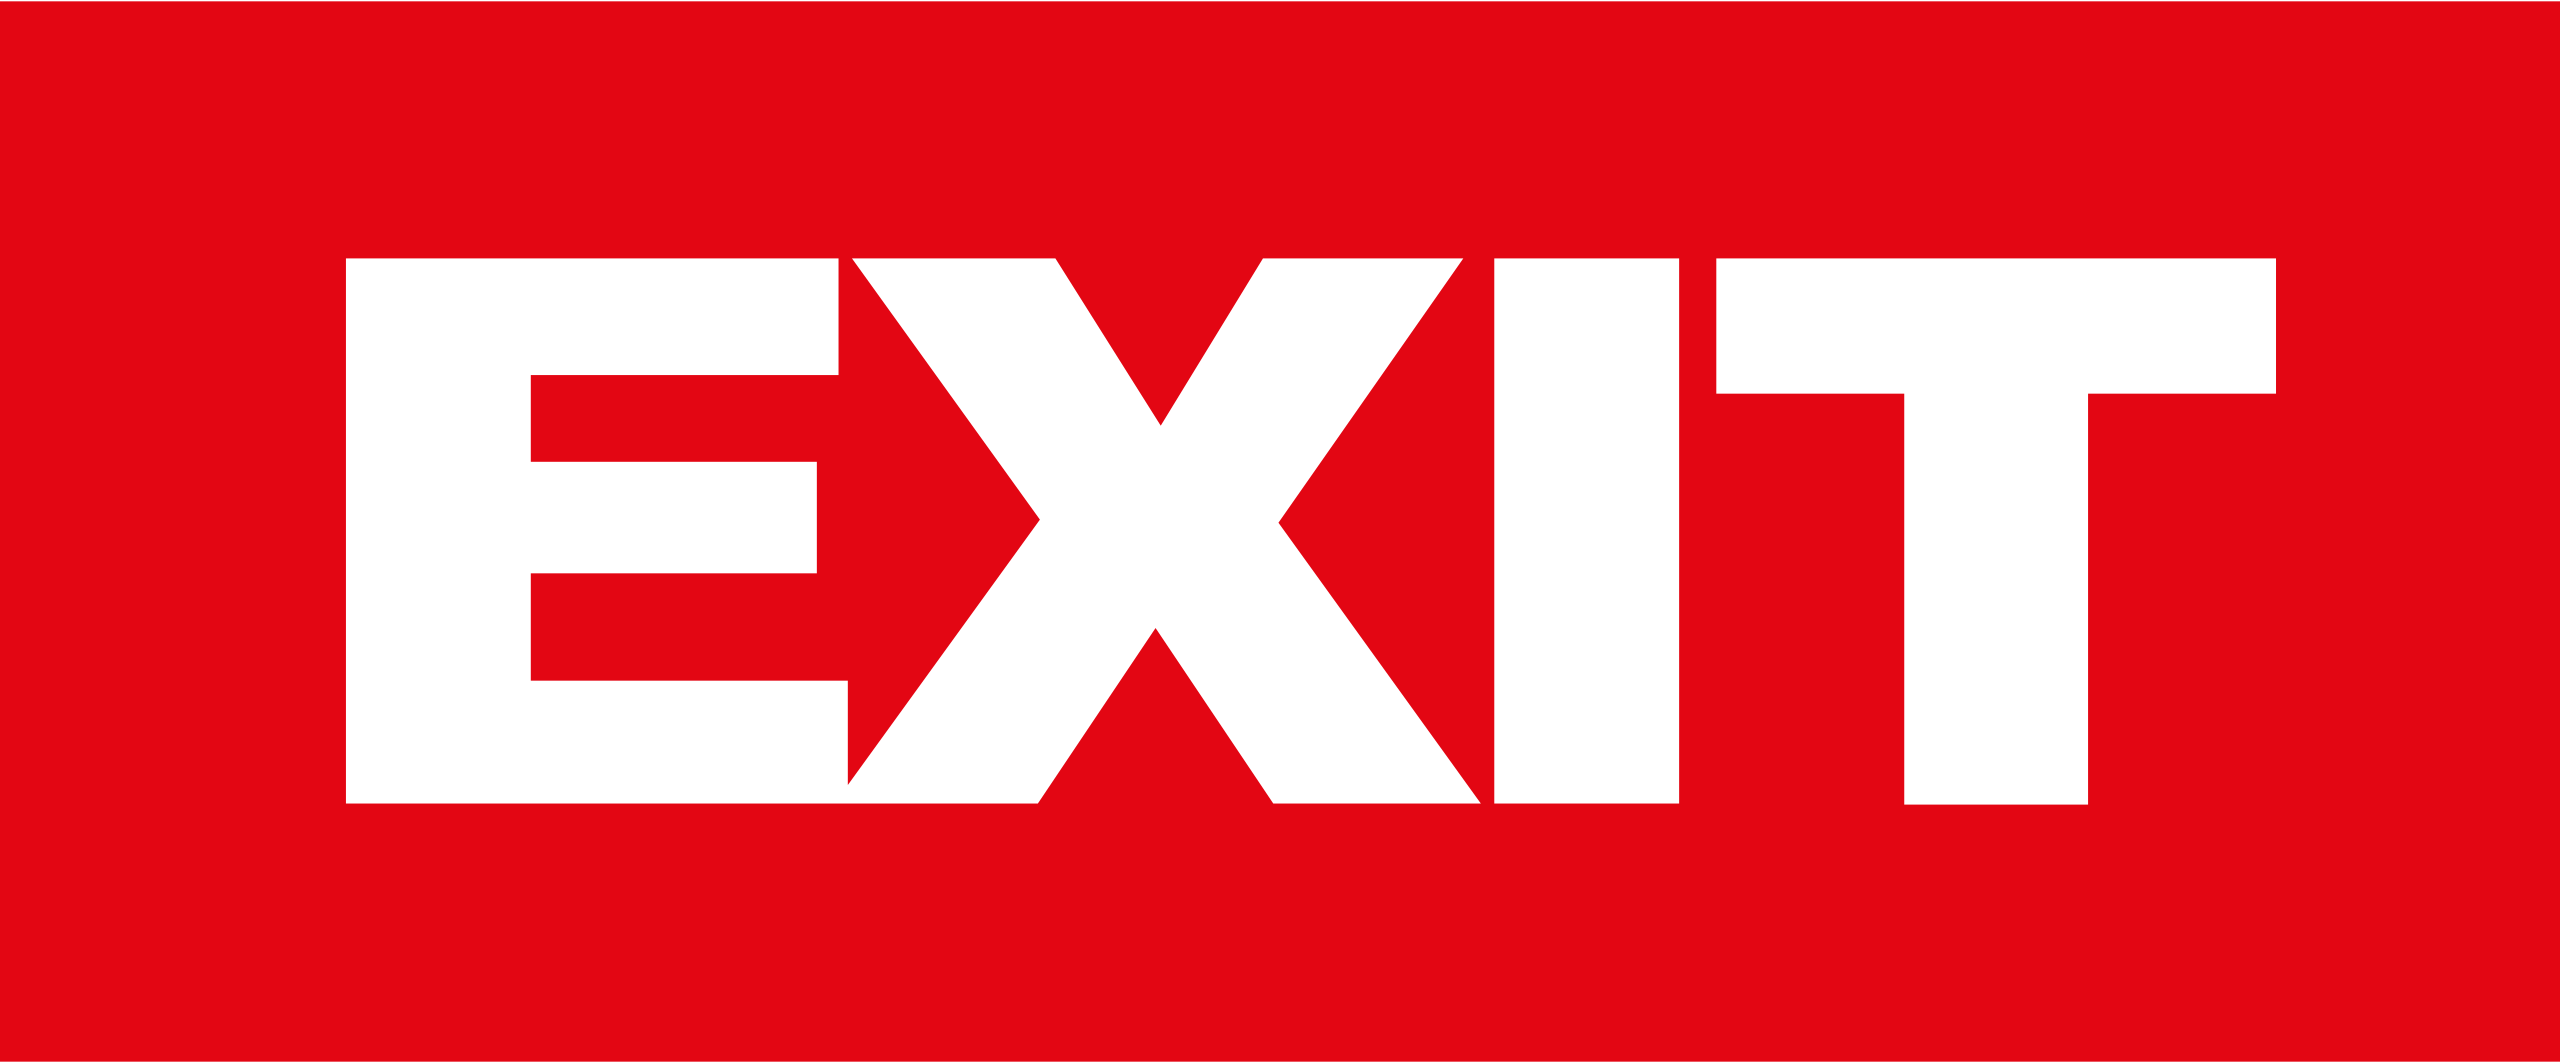 Police Exit